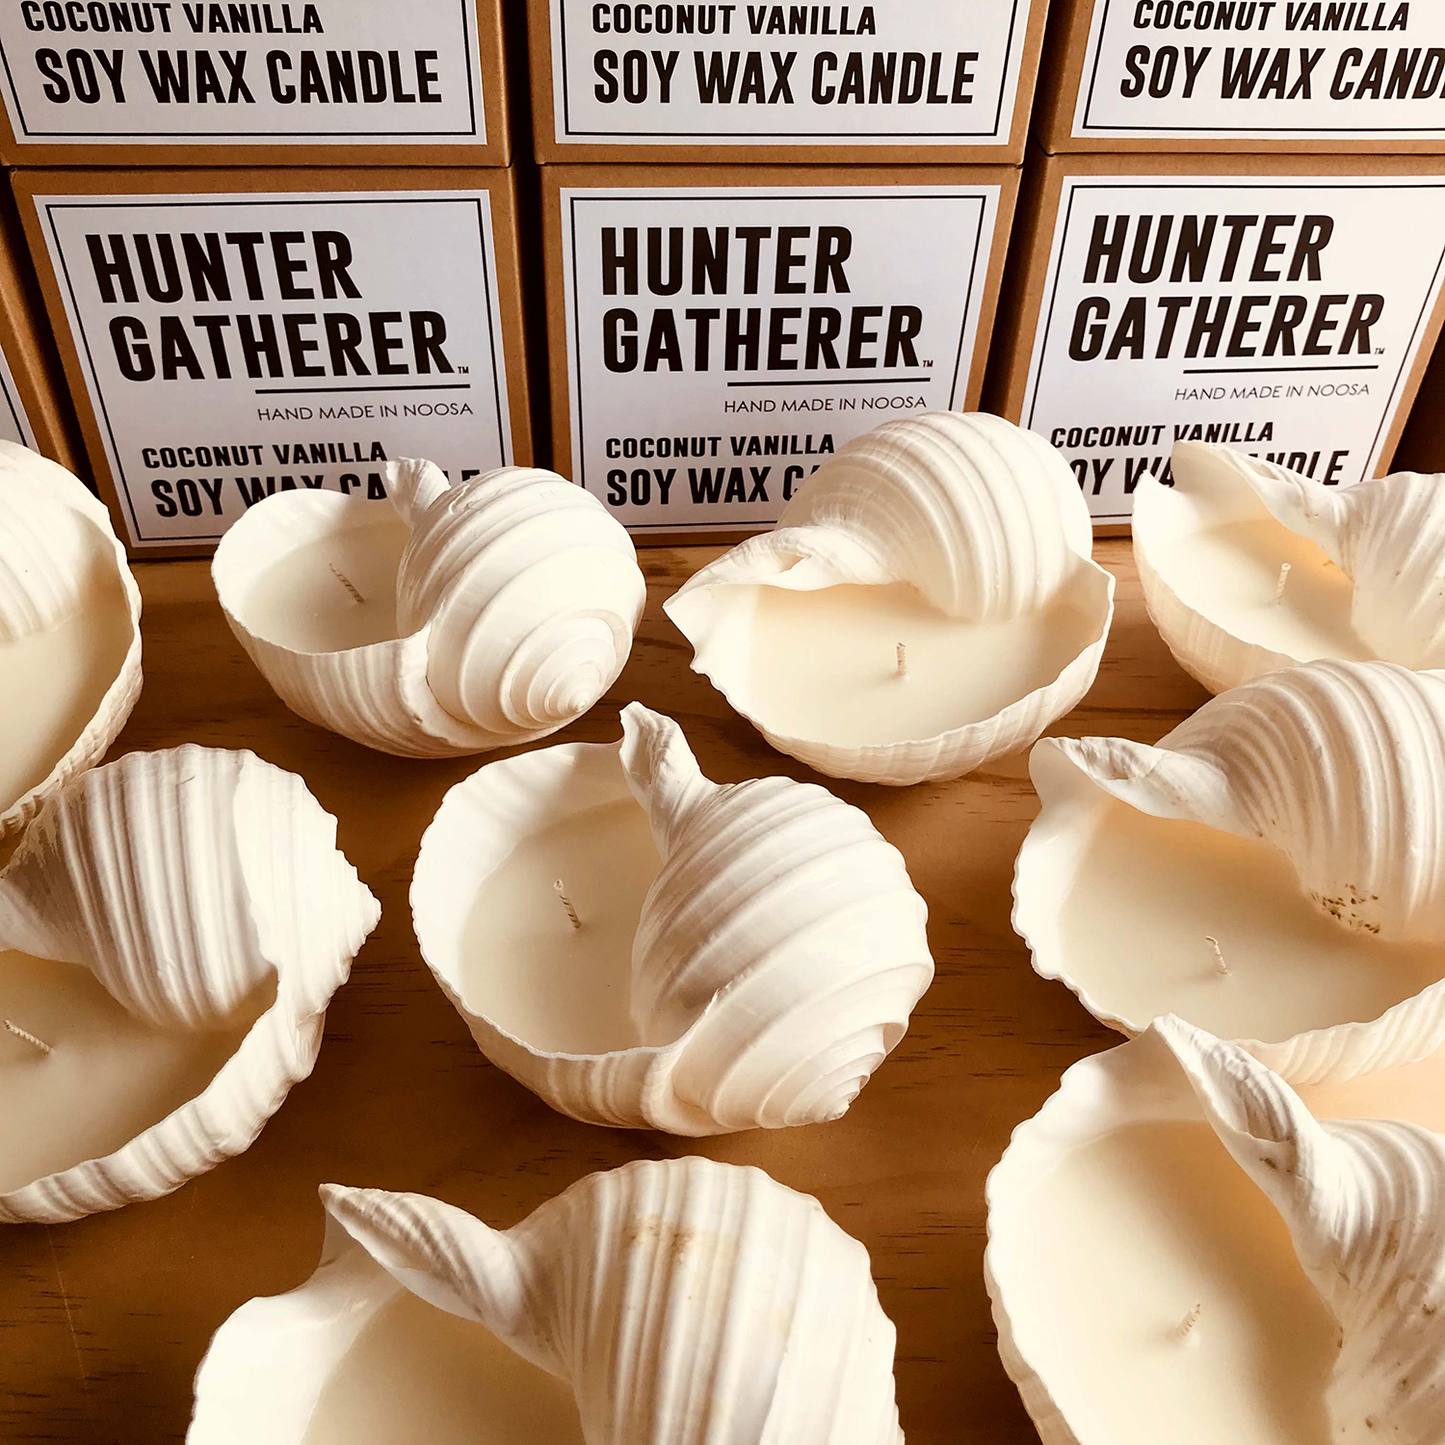 GENUINE SEA SHELL CANDLE / ALL NATURAL SCENTED SOY WAX CANDLE / Hand made in Noosa -  Australia. Made by HUNTER GATHERER / Chapter five Noosa. Our beautiful seashell candles are the perfect addition to your home, or beach house. Our sea shell candles make a perfect gift for a special friend, loved one, or just a gift for yourself to enjoy!